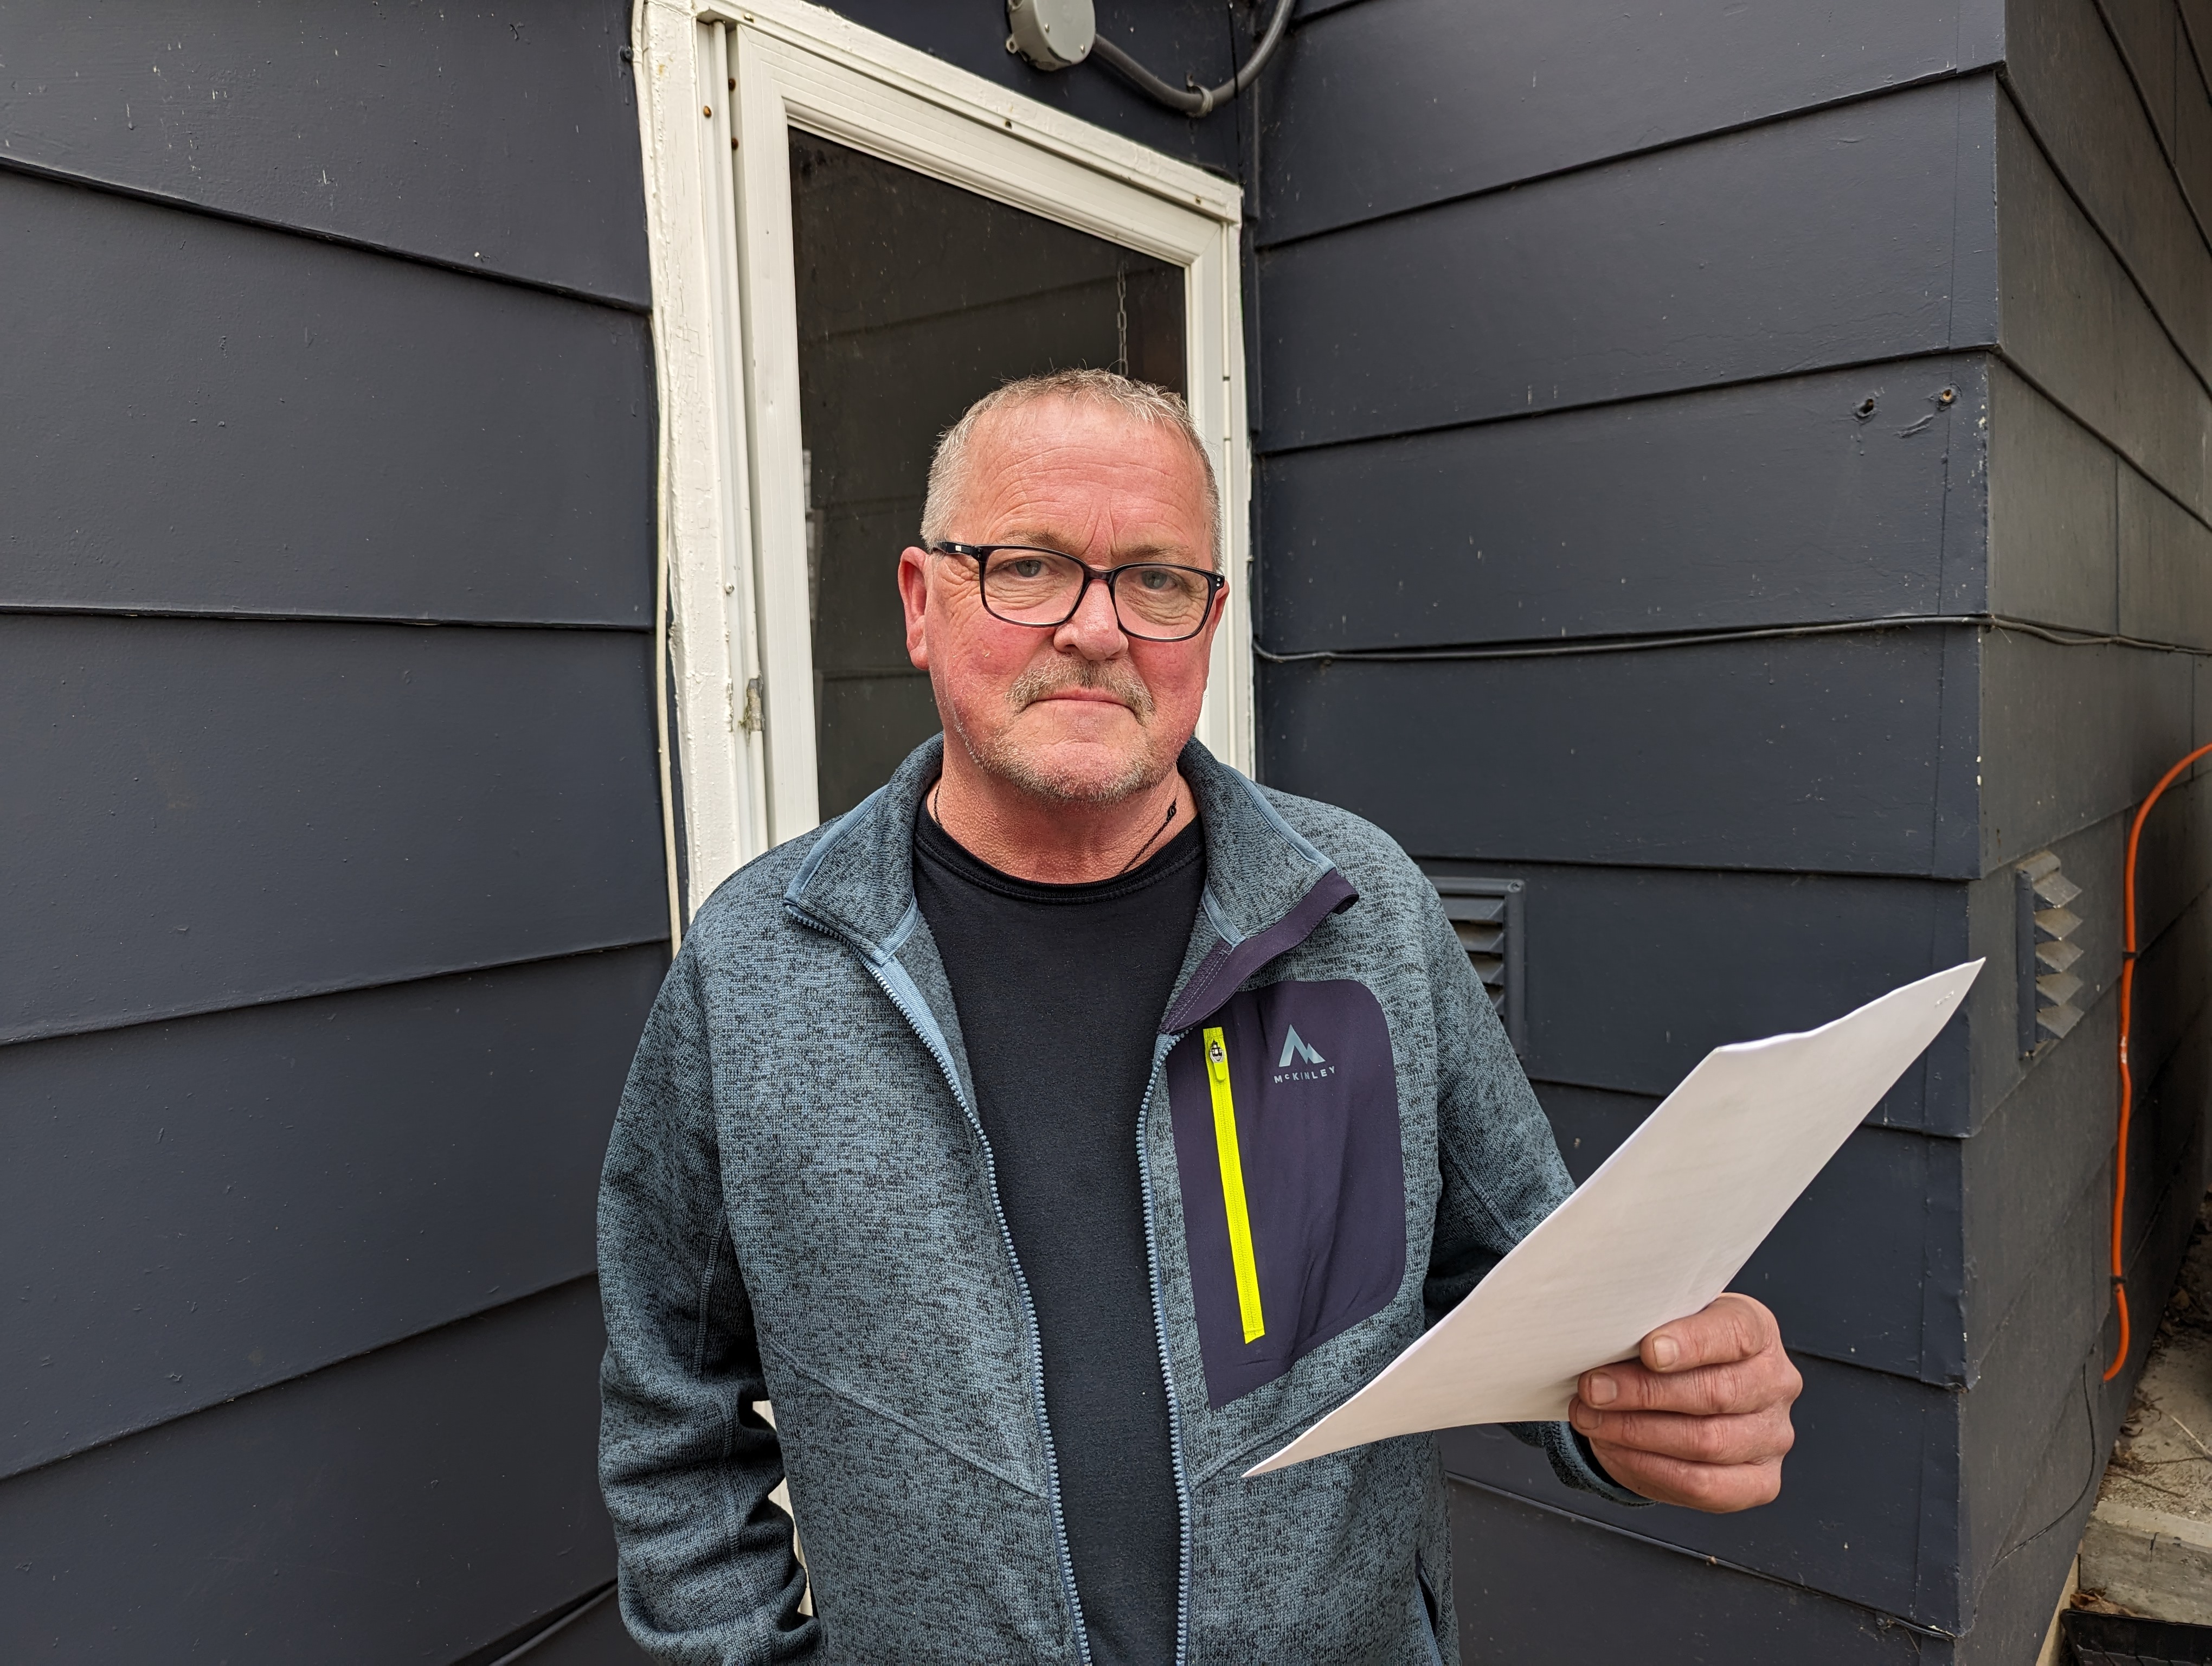 A Nova Scotia senior and the ‘terrible stress’ of moving during a housing crisis